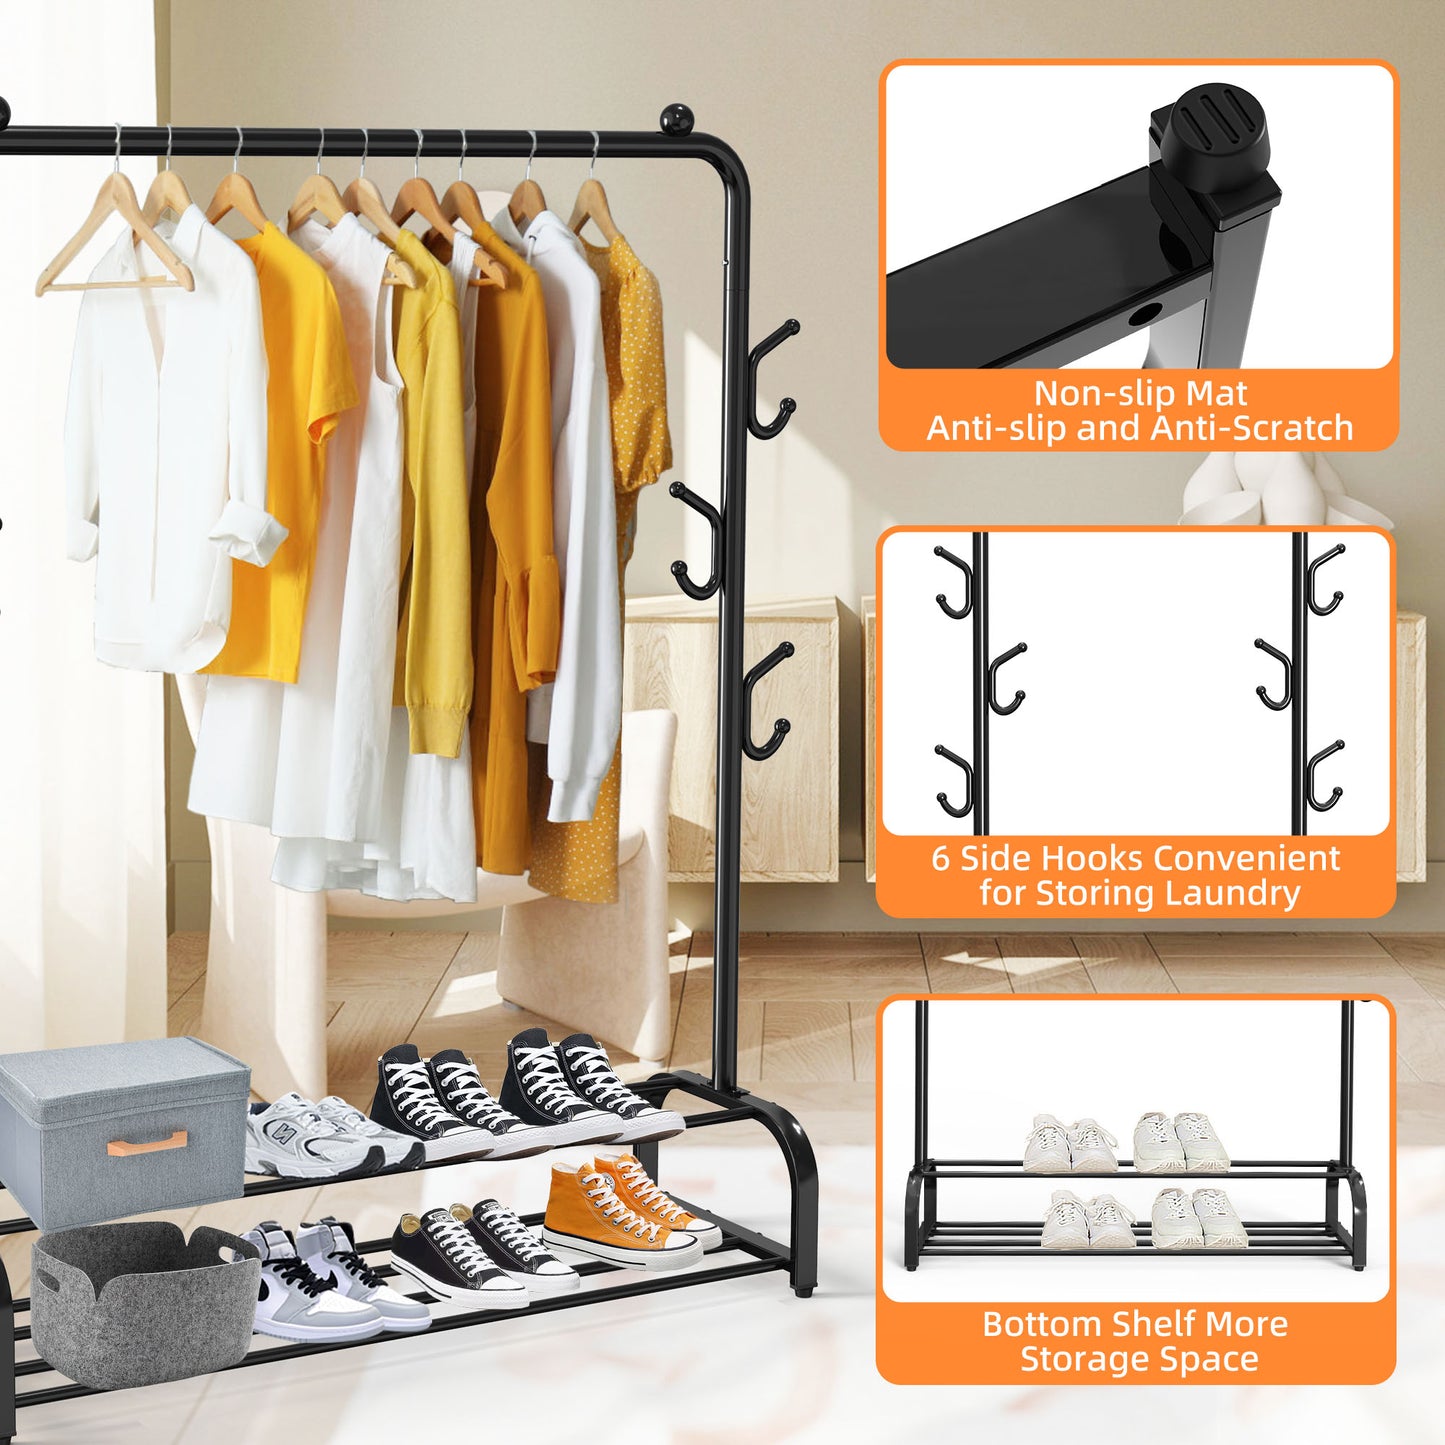 NEFOSO Clothing Garment Rack with 6 Hooks and Double Bottom Shelf Standard Clothes Organizer for Hanging Clothes, Chrome（Black)